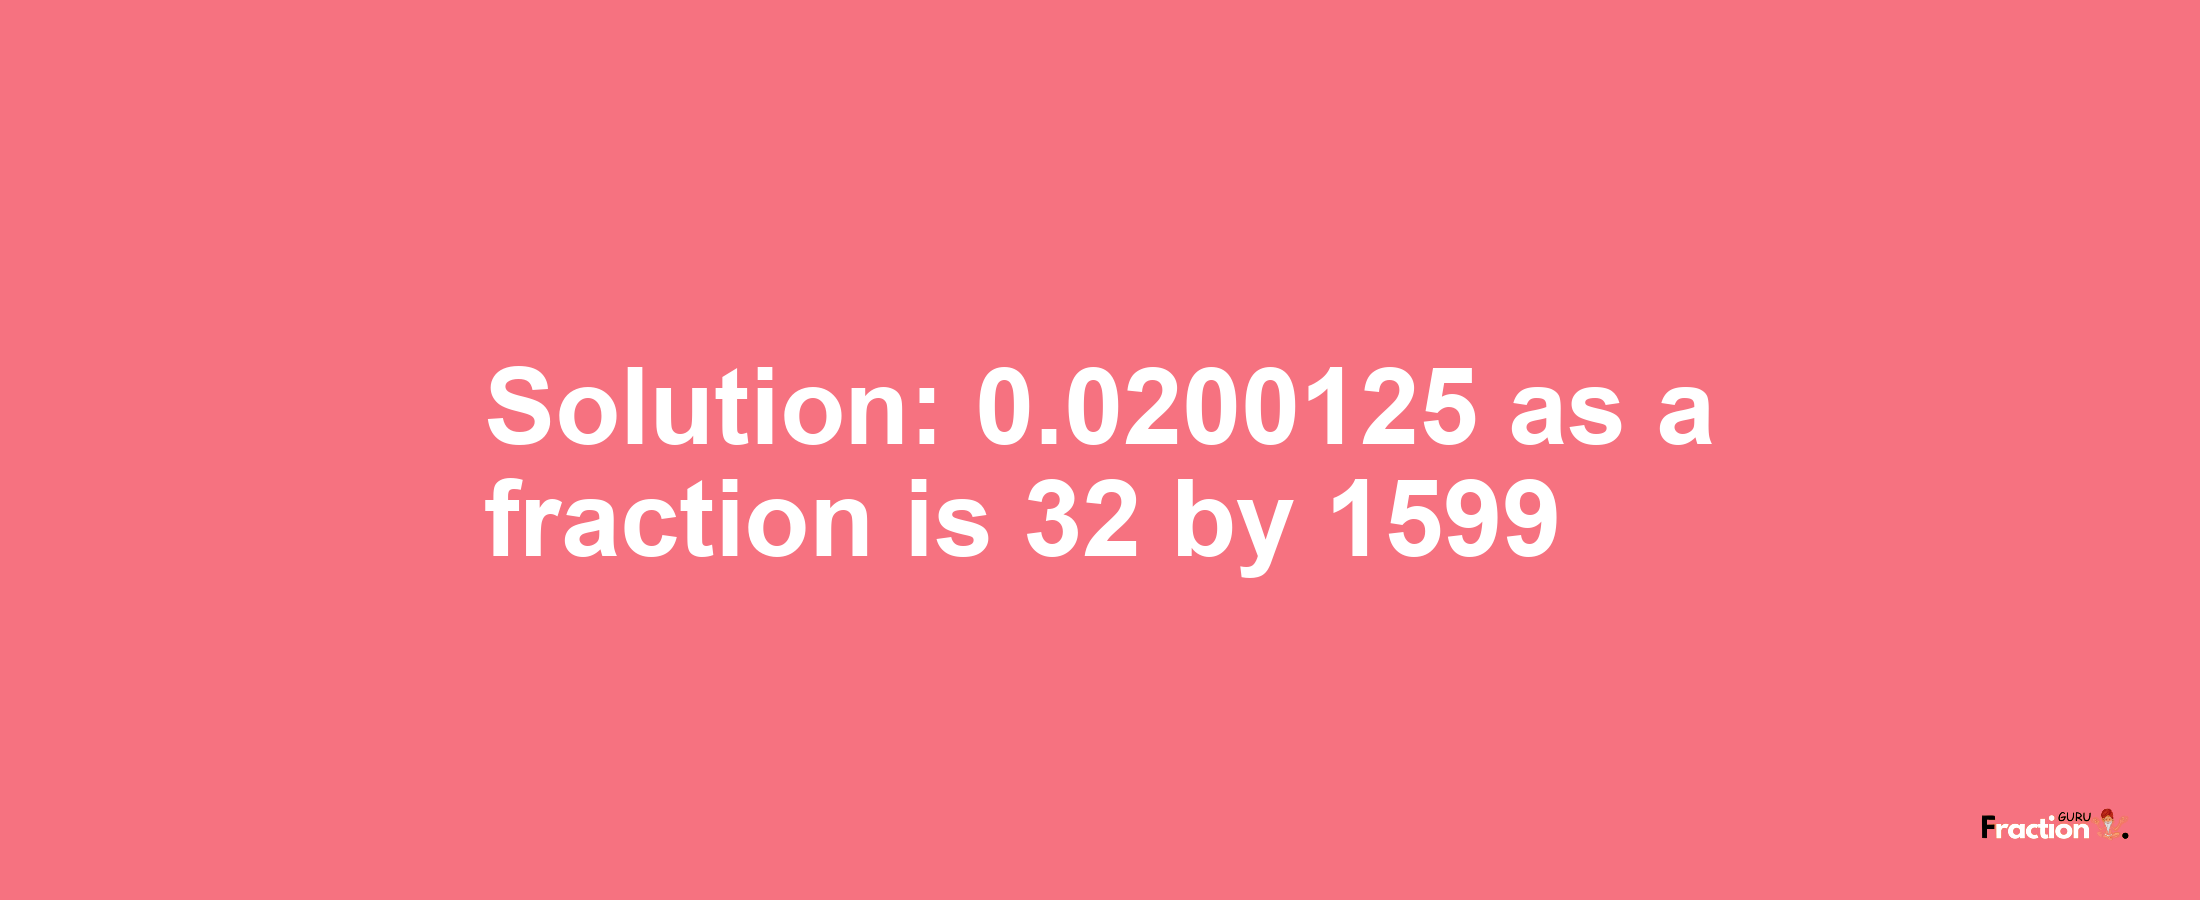 Solution:0.0200125 as a fraction is 32/1599